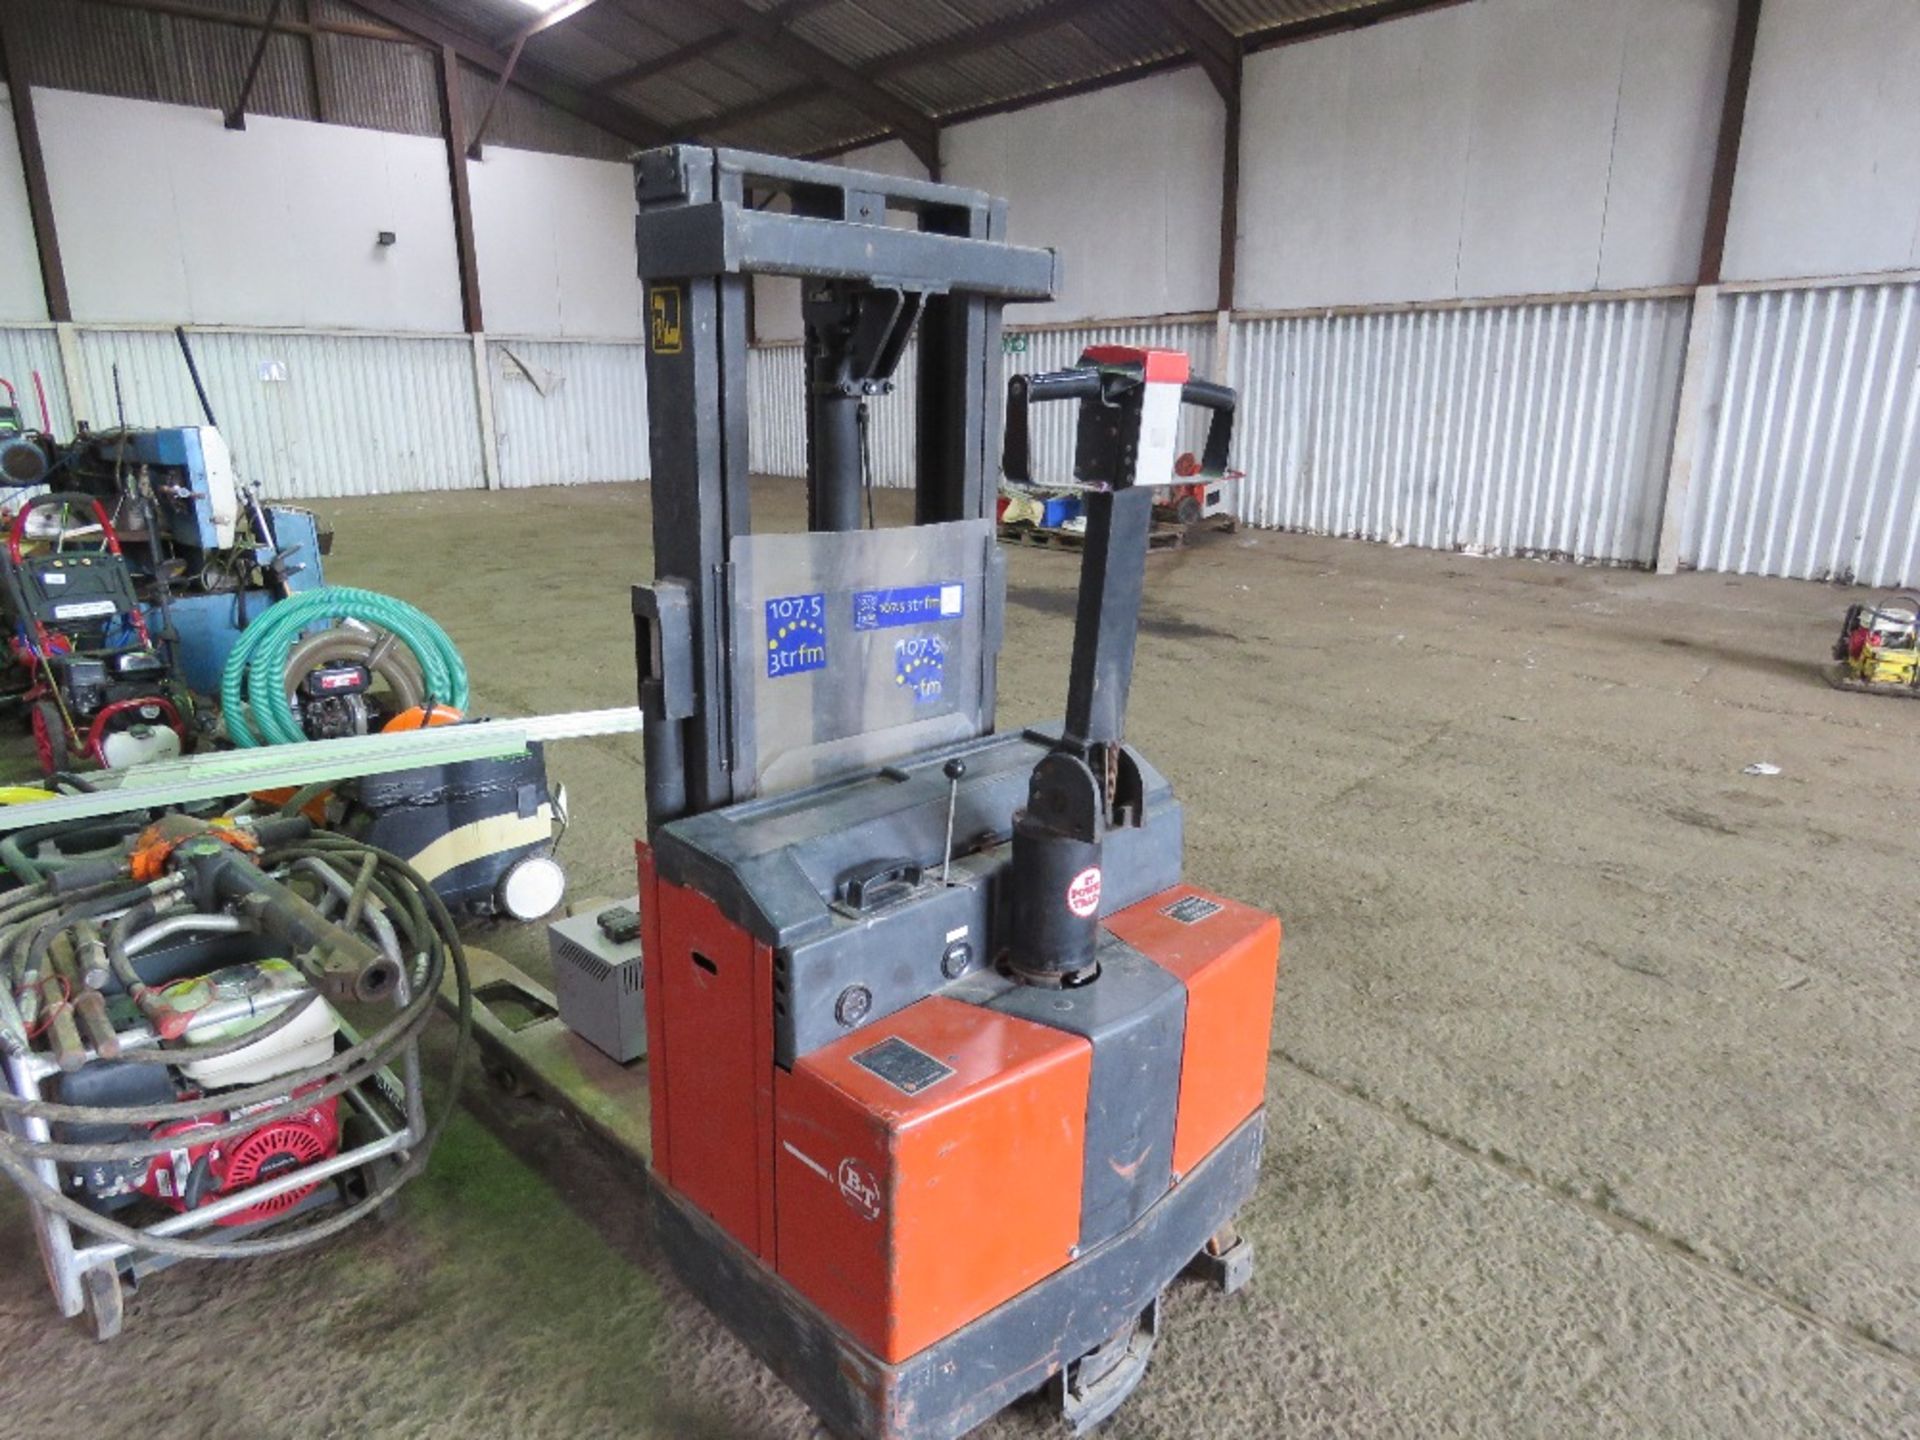 BT ROLATRUC BATTERY POWERED PALLET TRUCK/FORKLIFT WITH A CHARGER. WHEN TESTED WAS SEEN TO DRIVE AND - Image 3 of 11